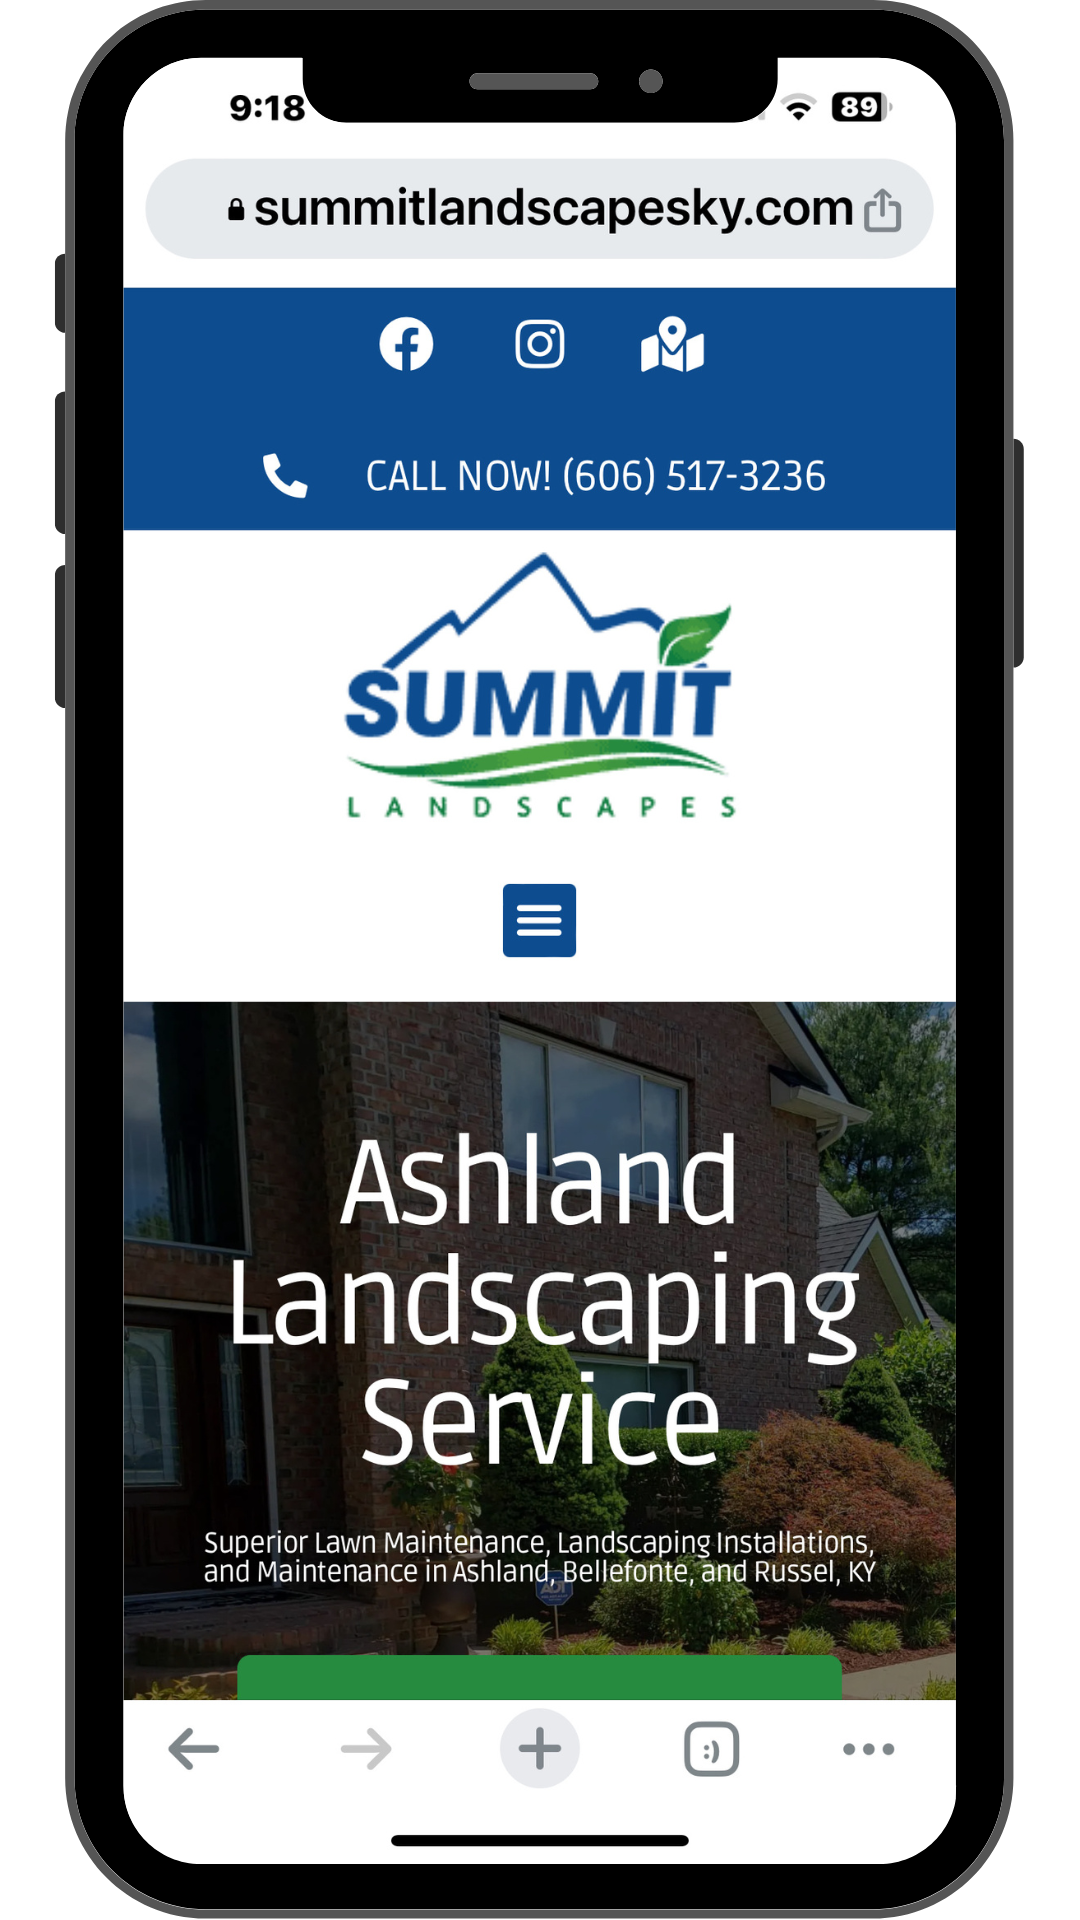 A Landscapers website optimized and showing on a mobile device.